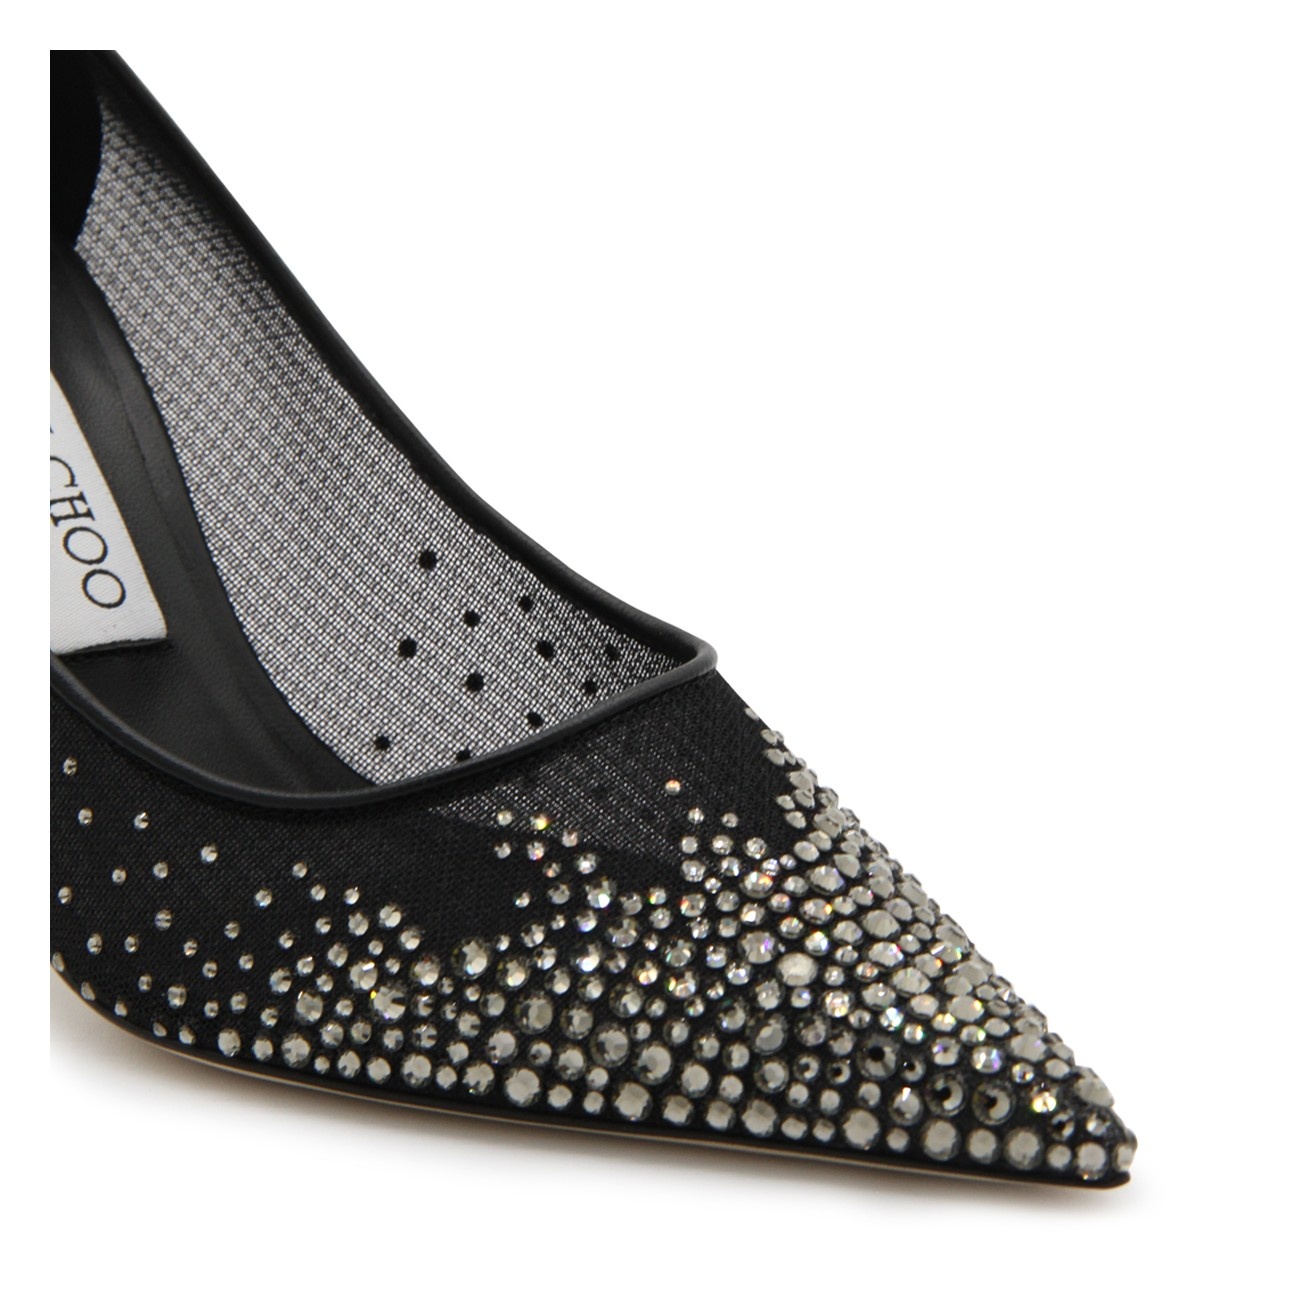 black and crystal love pumps - 4